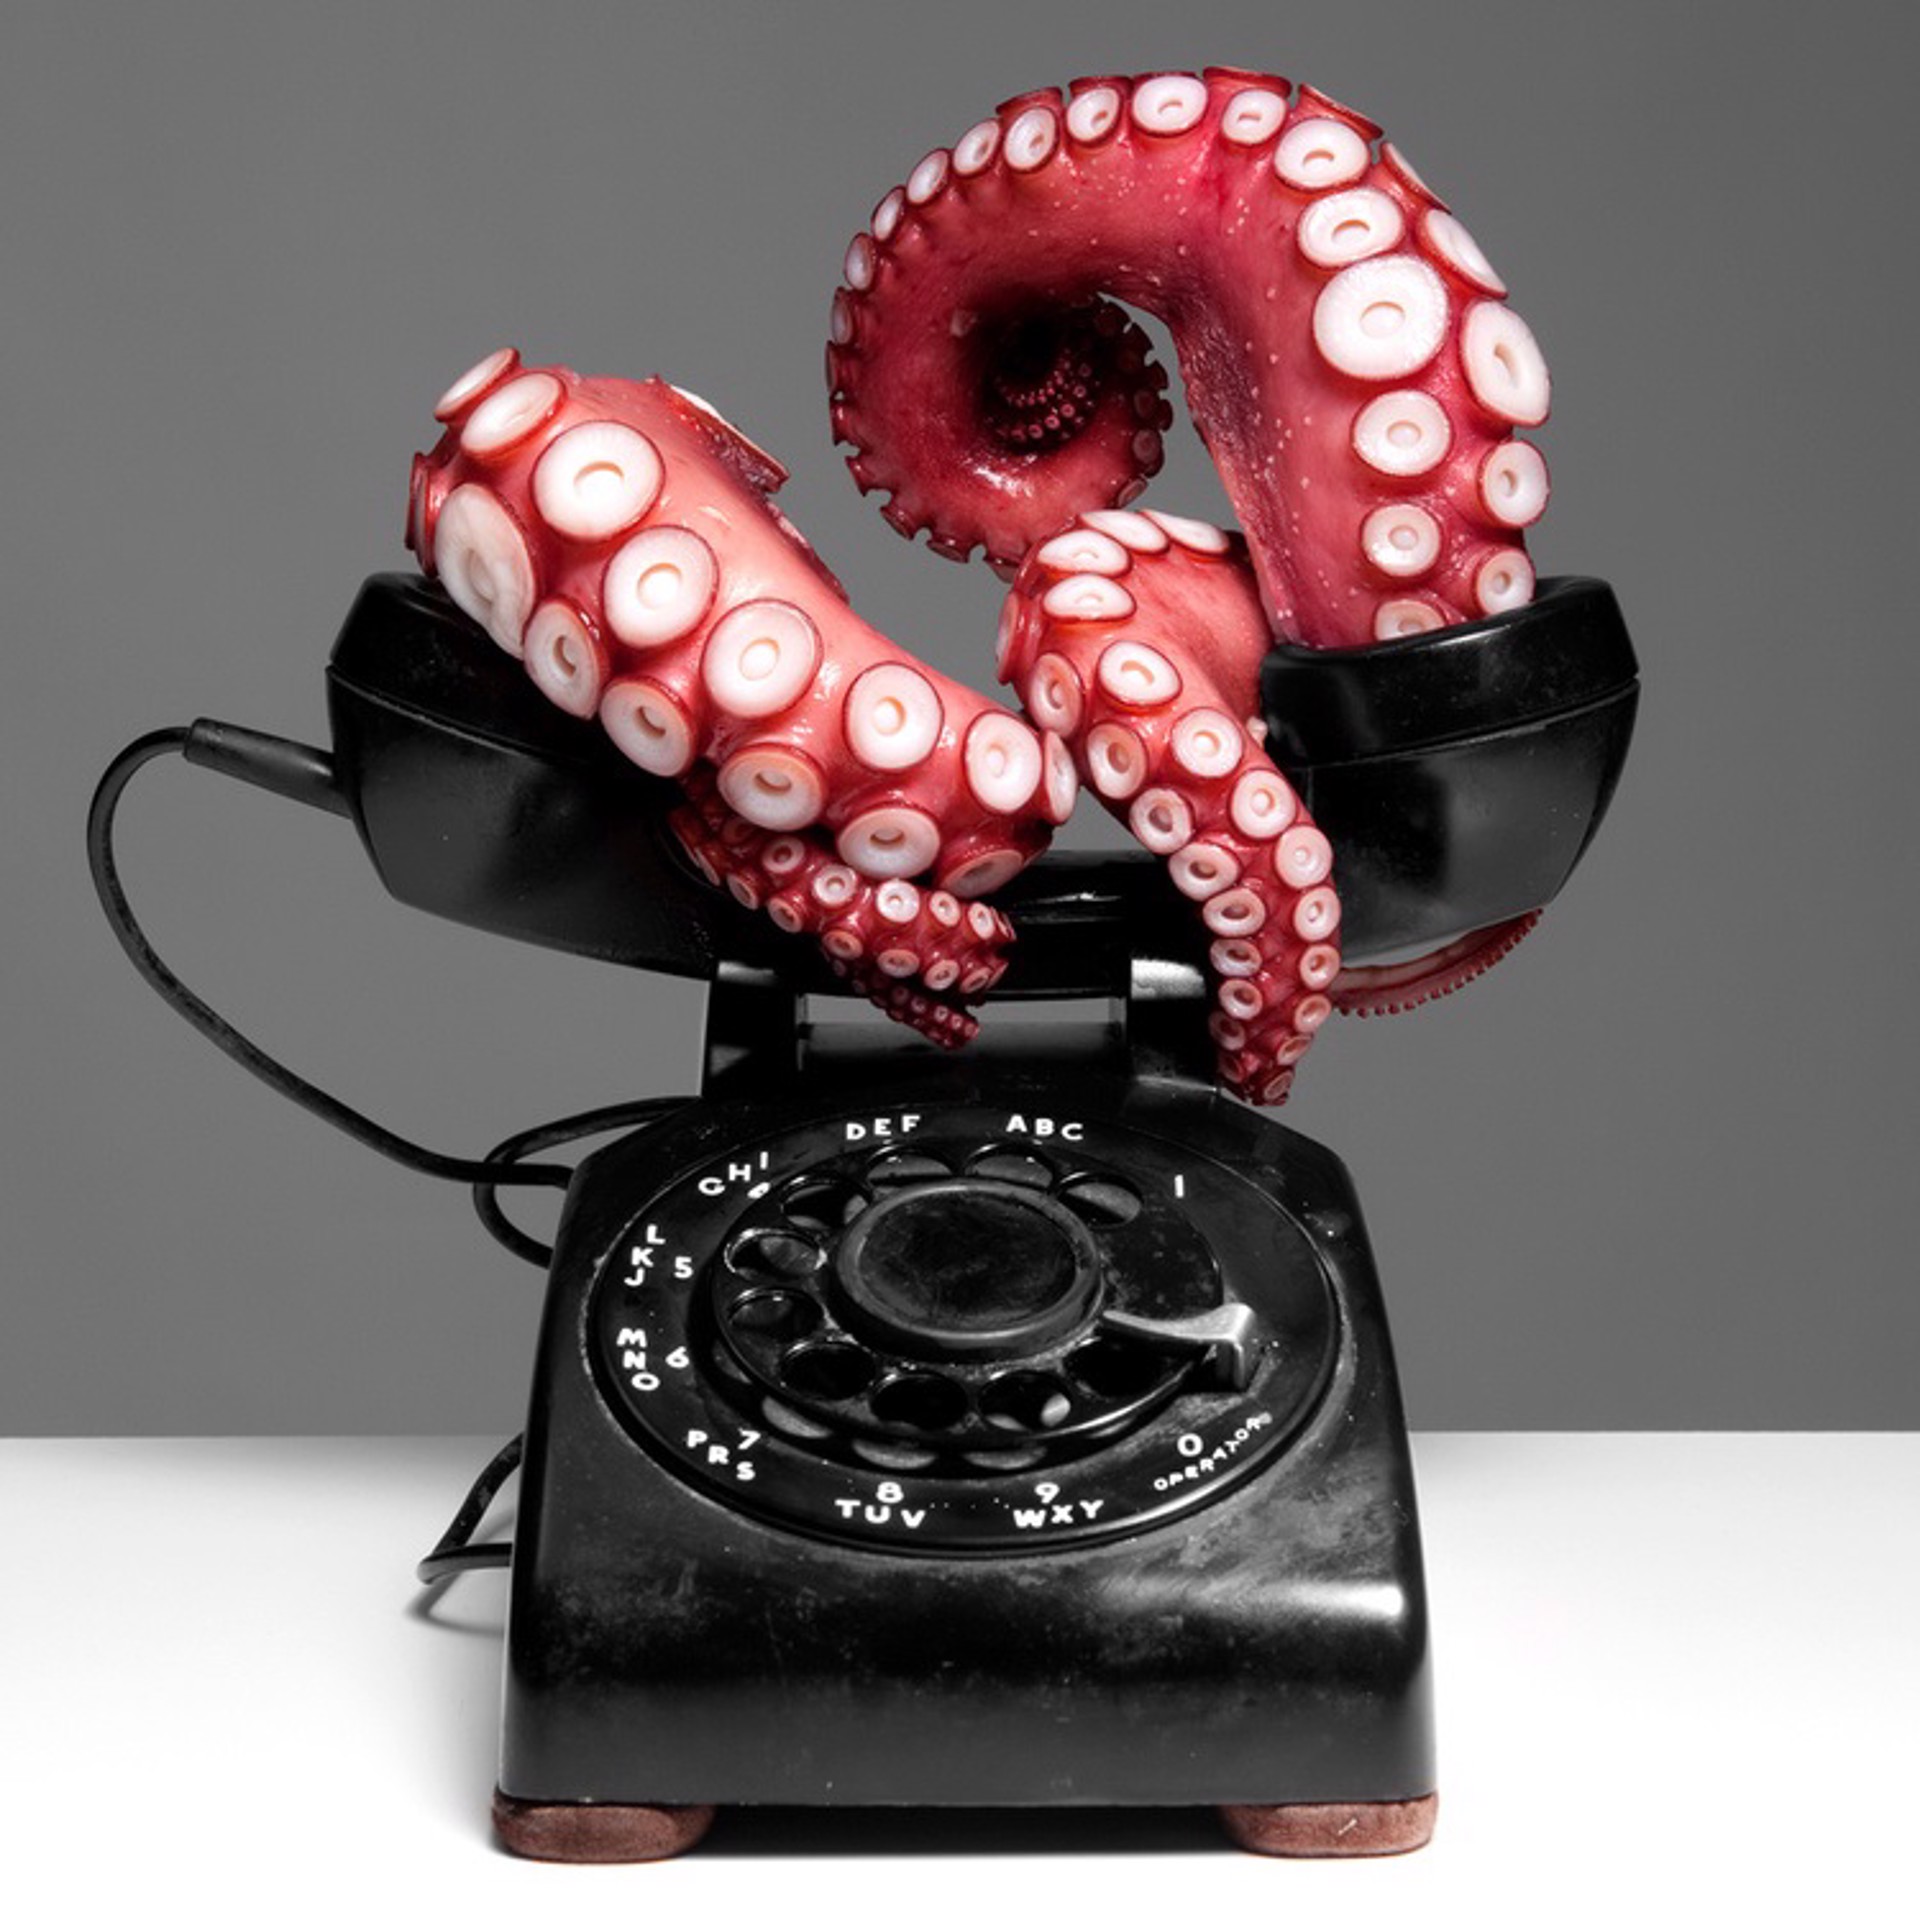 Octopus Telephone by Max Shuster